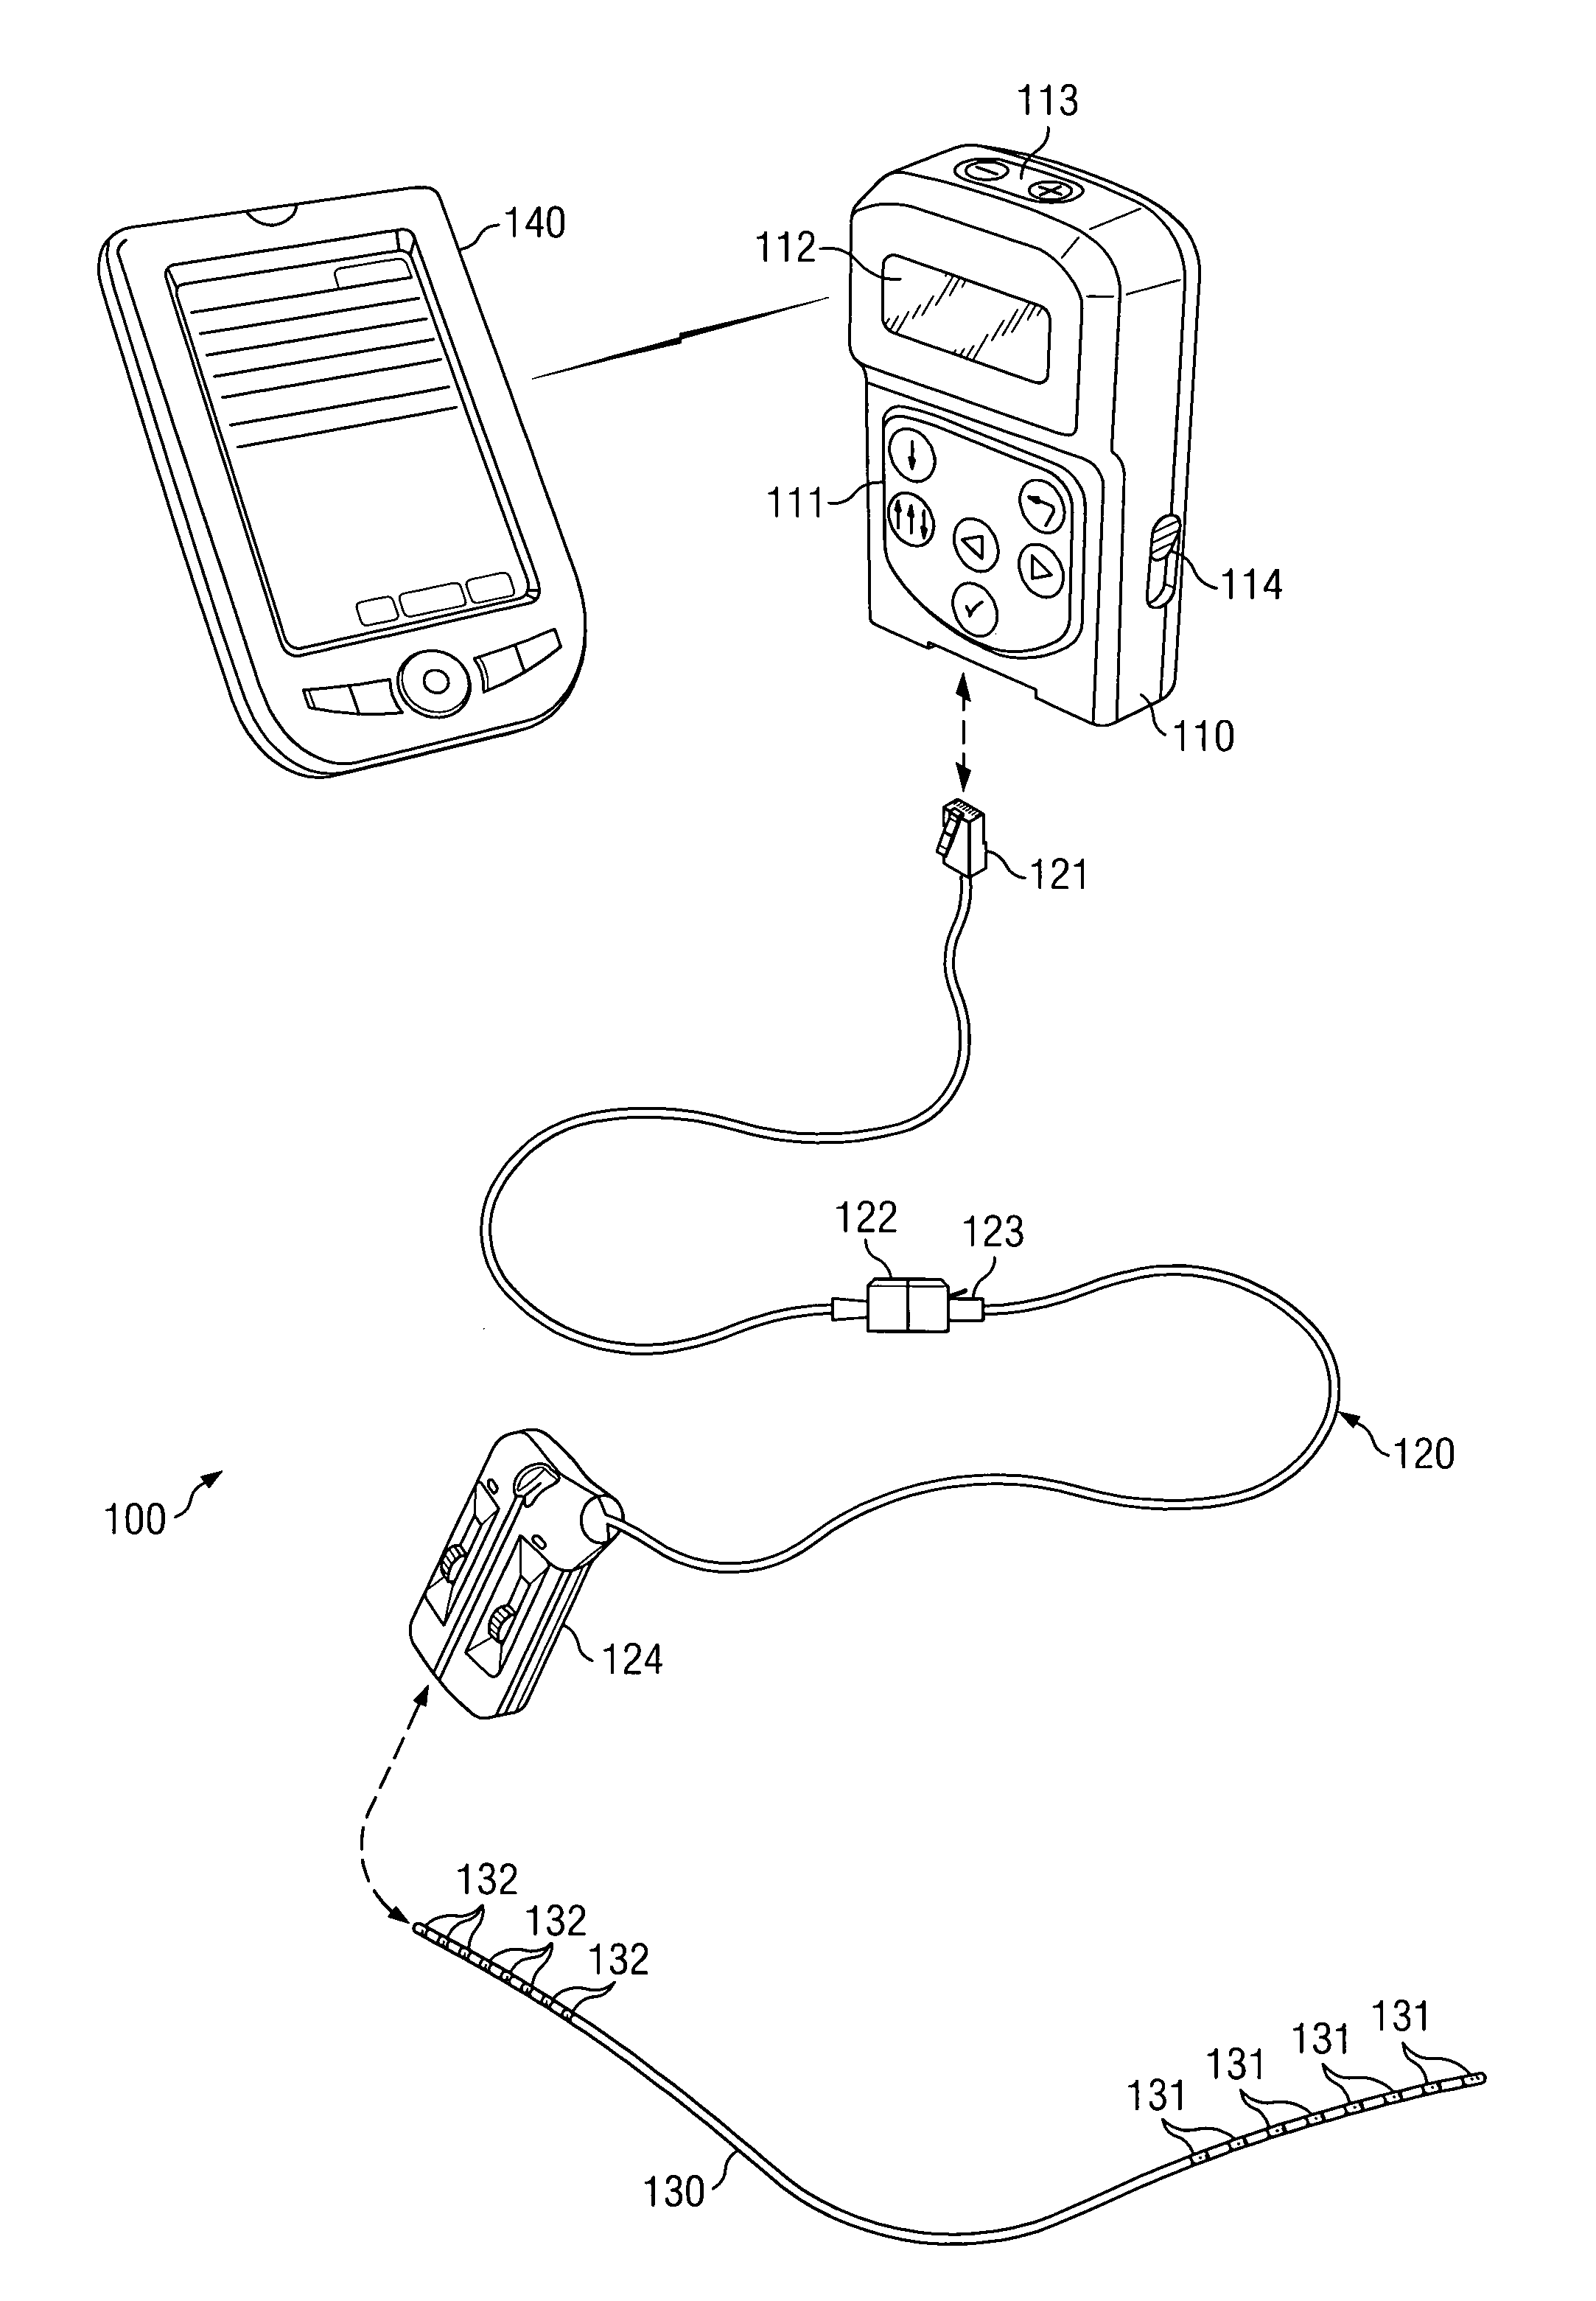 Clinician programmer for use with trial stimulator